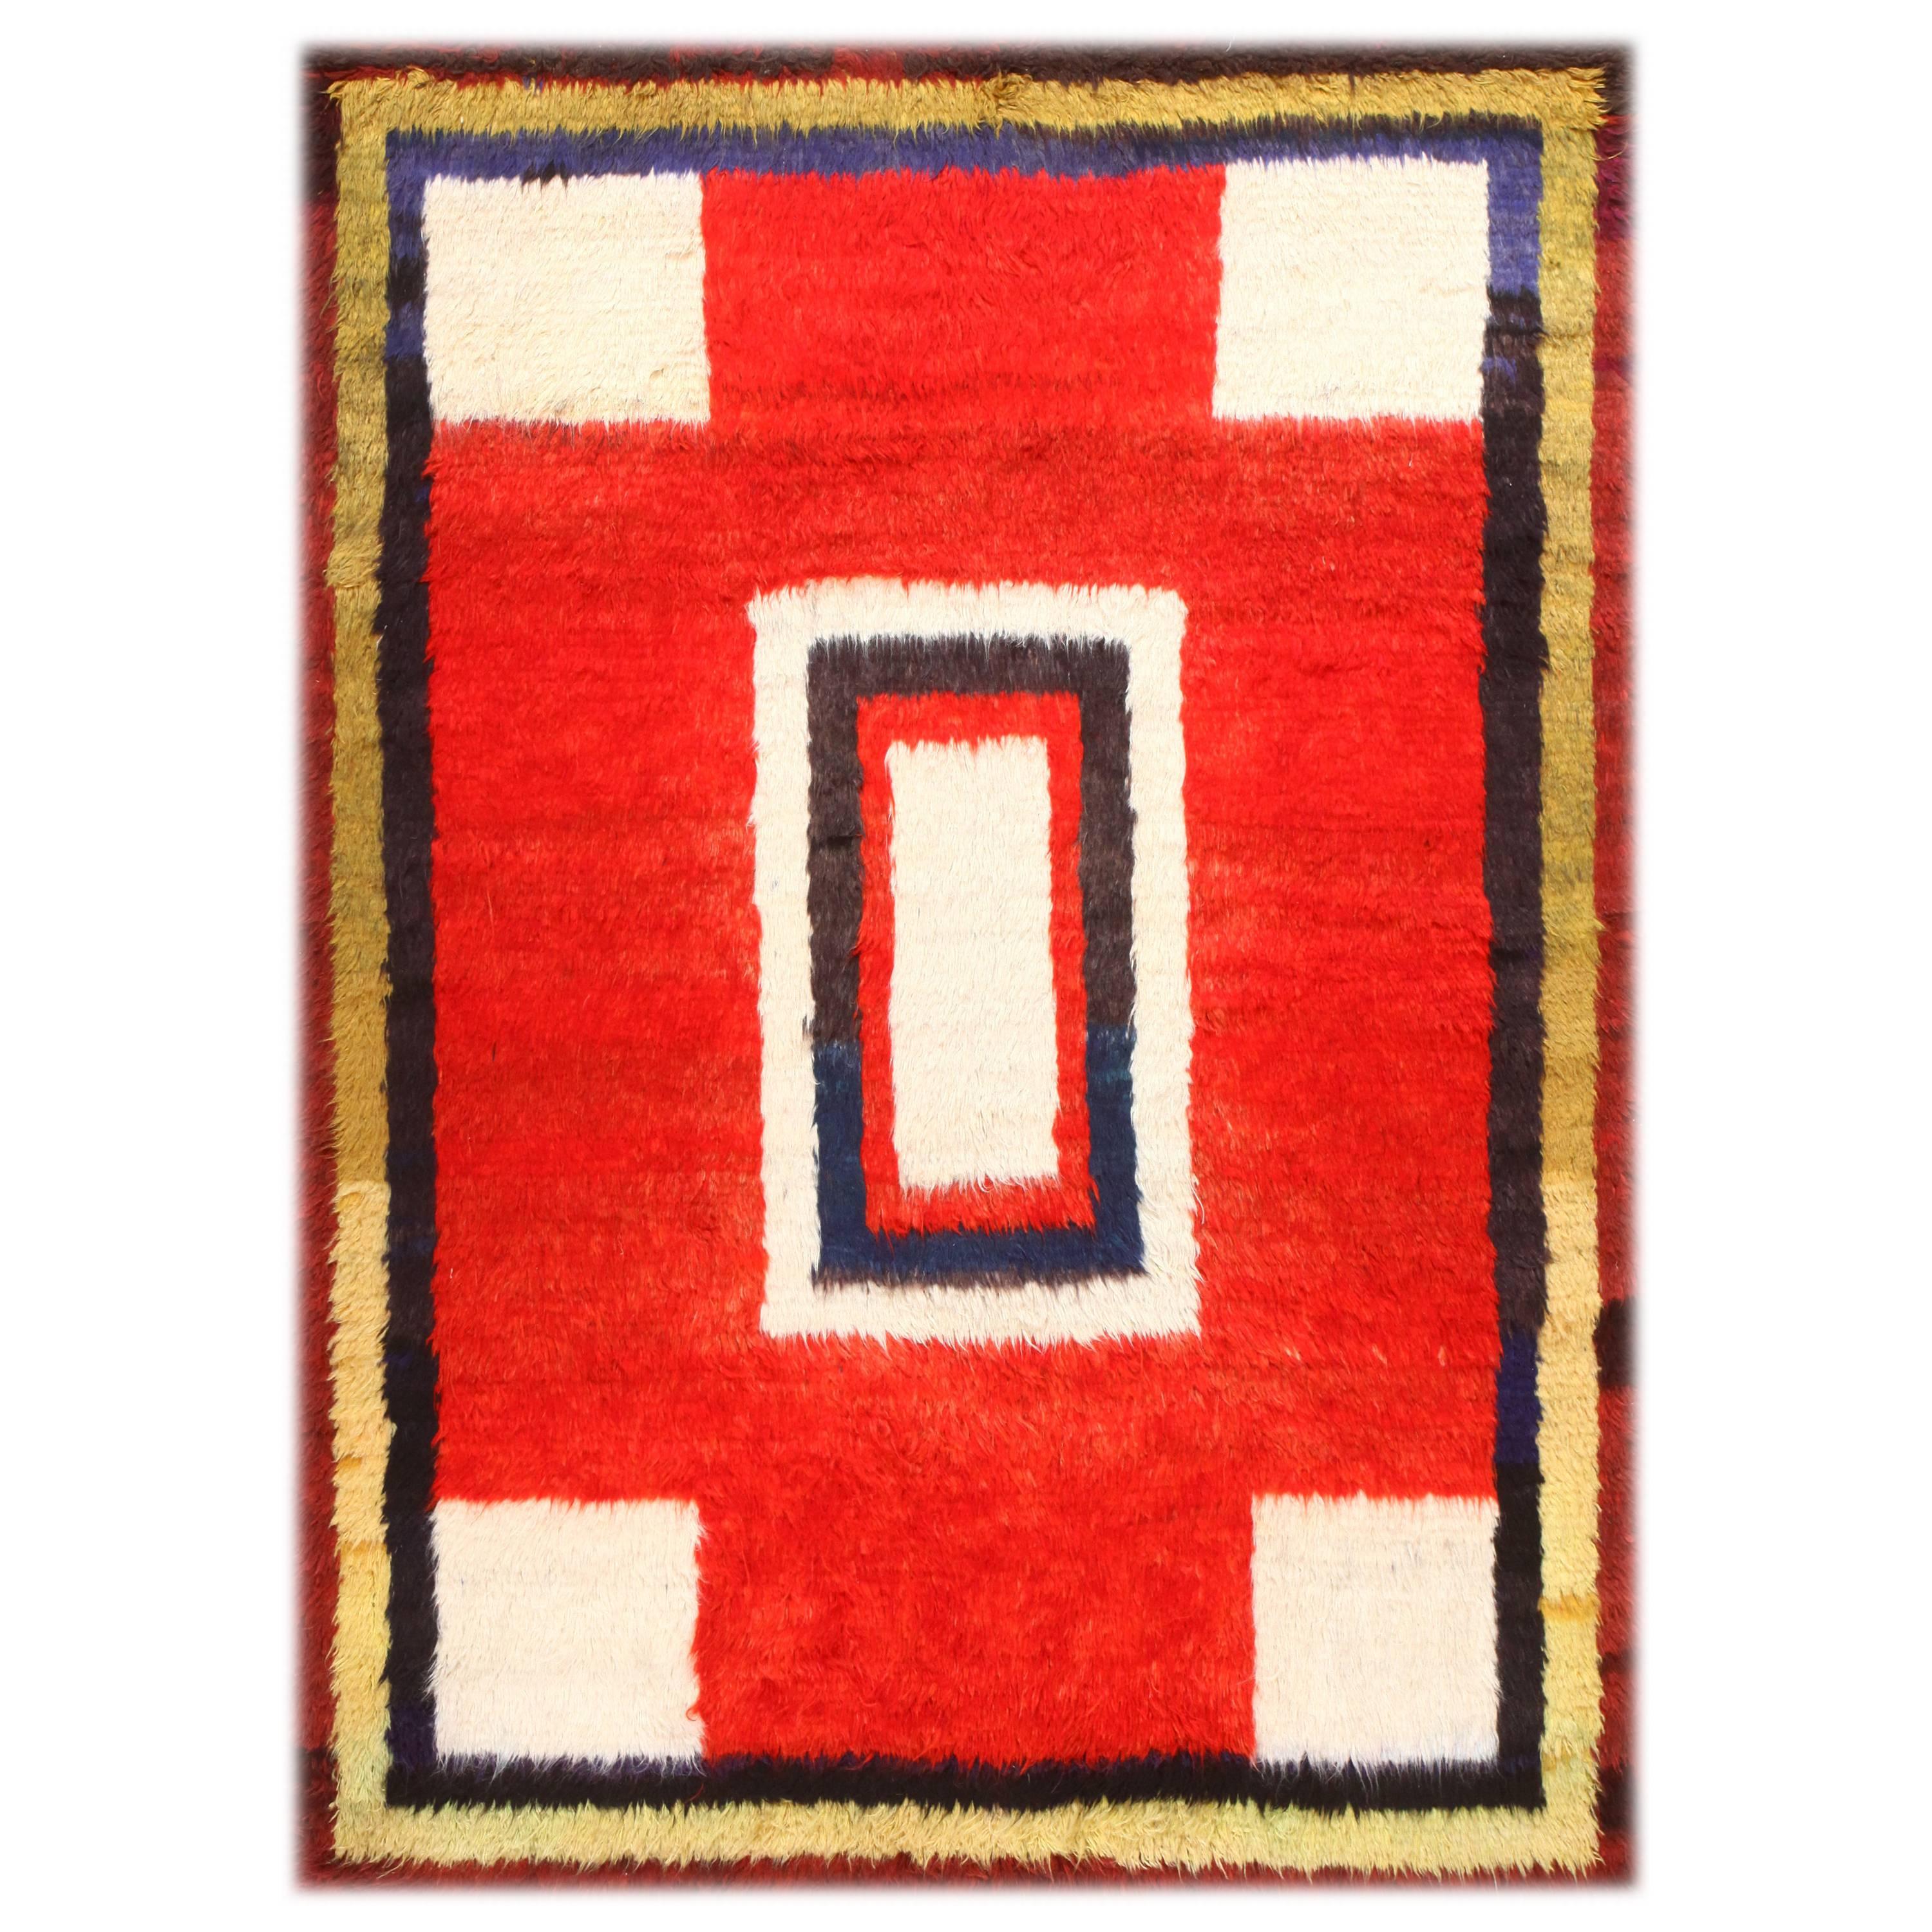 Vintage Persian Gabbeh Rug. Size: 5 ft 10 in x 7 ft 9 in (1.78 m x 2.36 m)